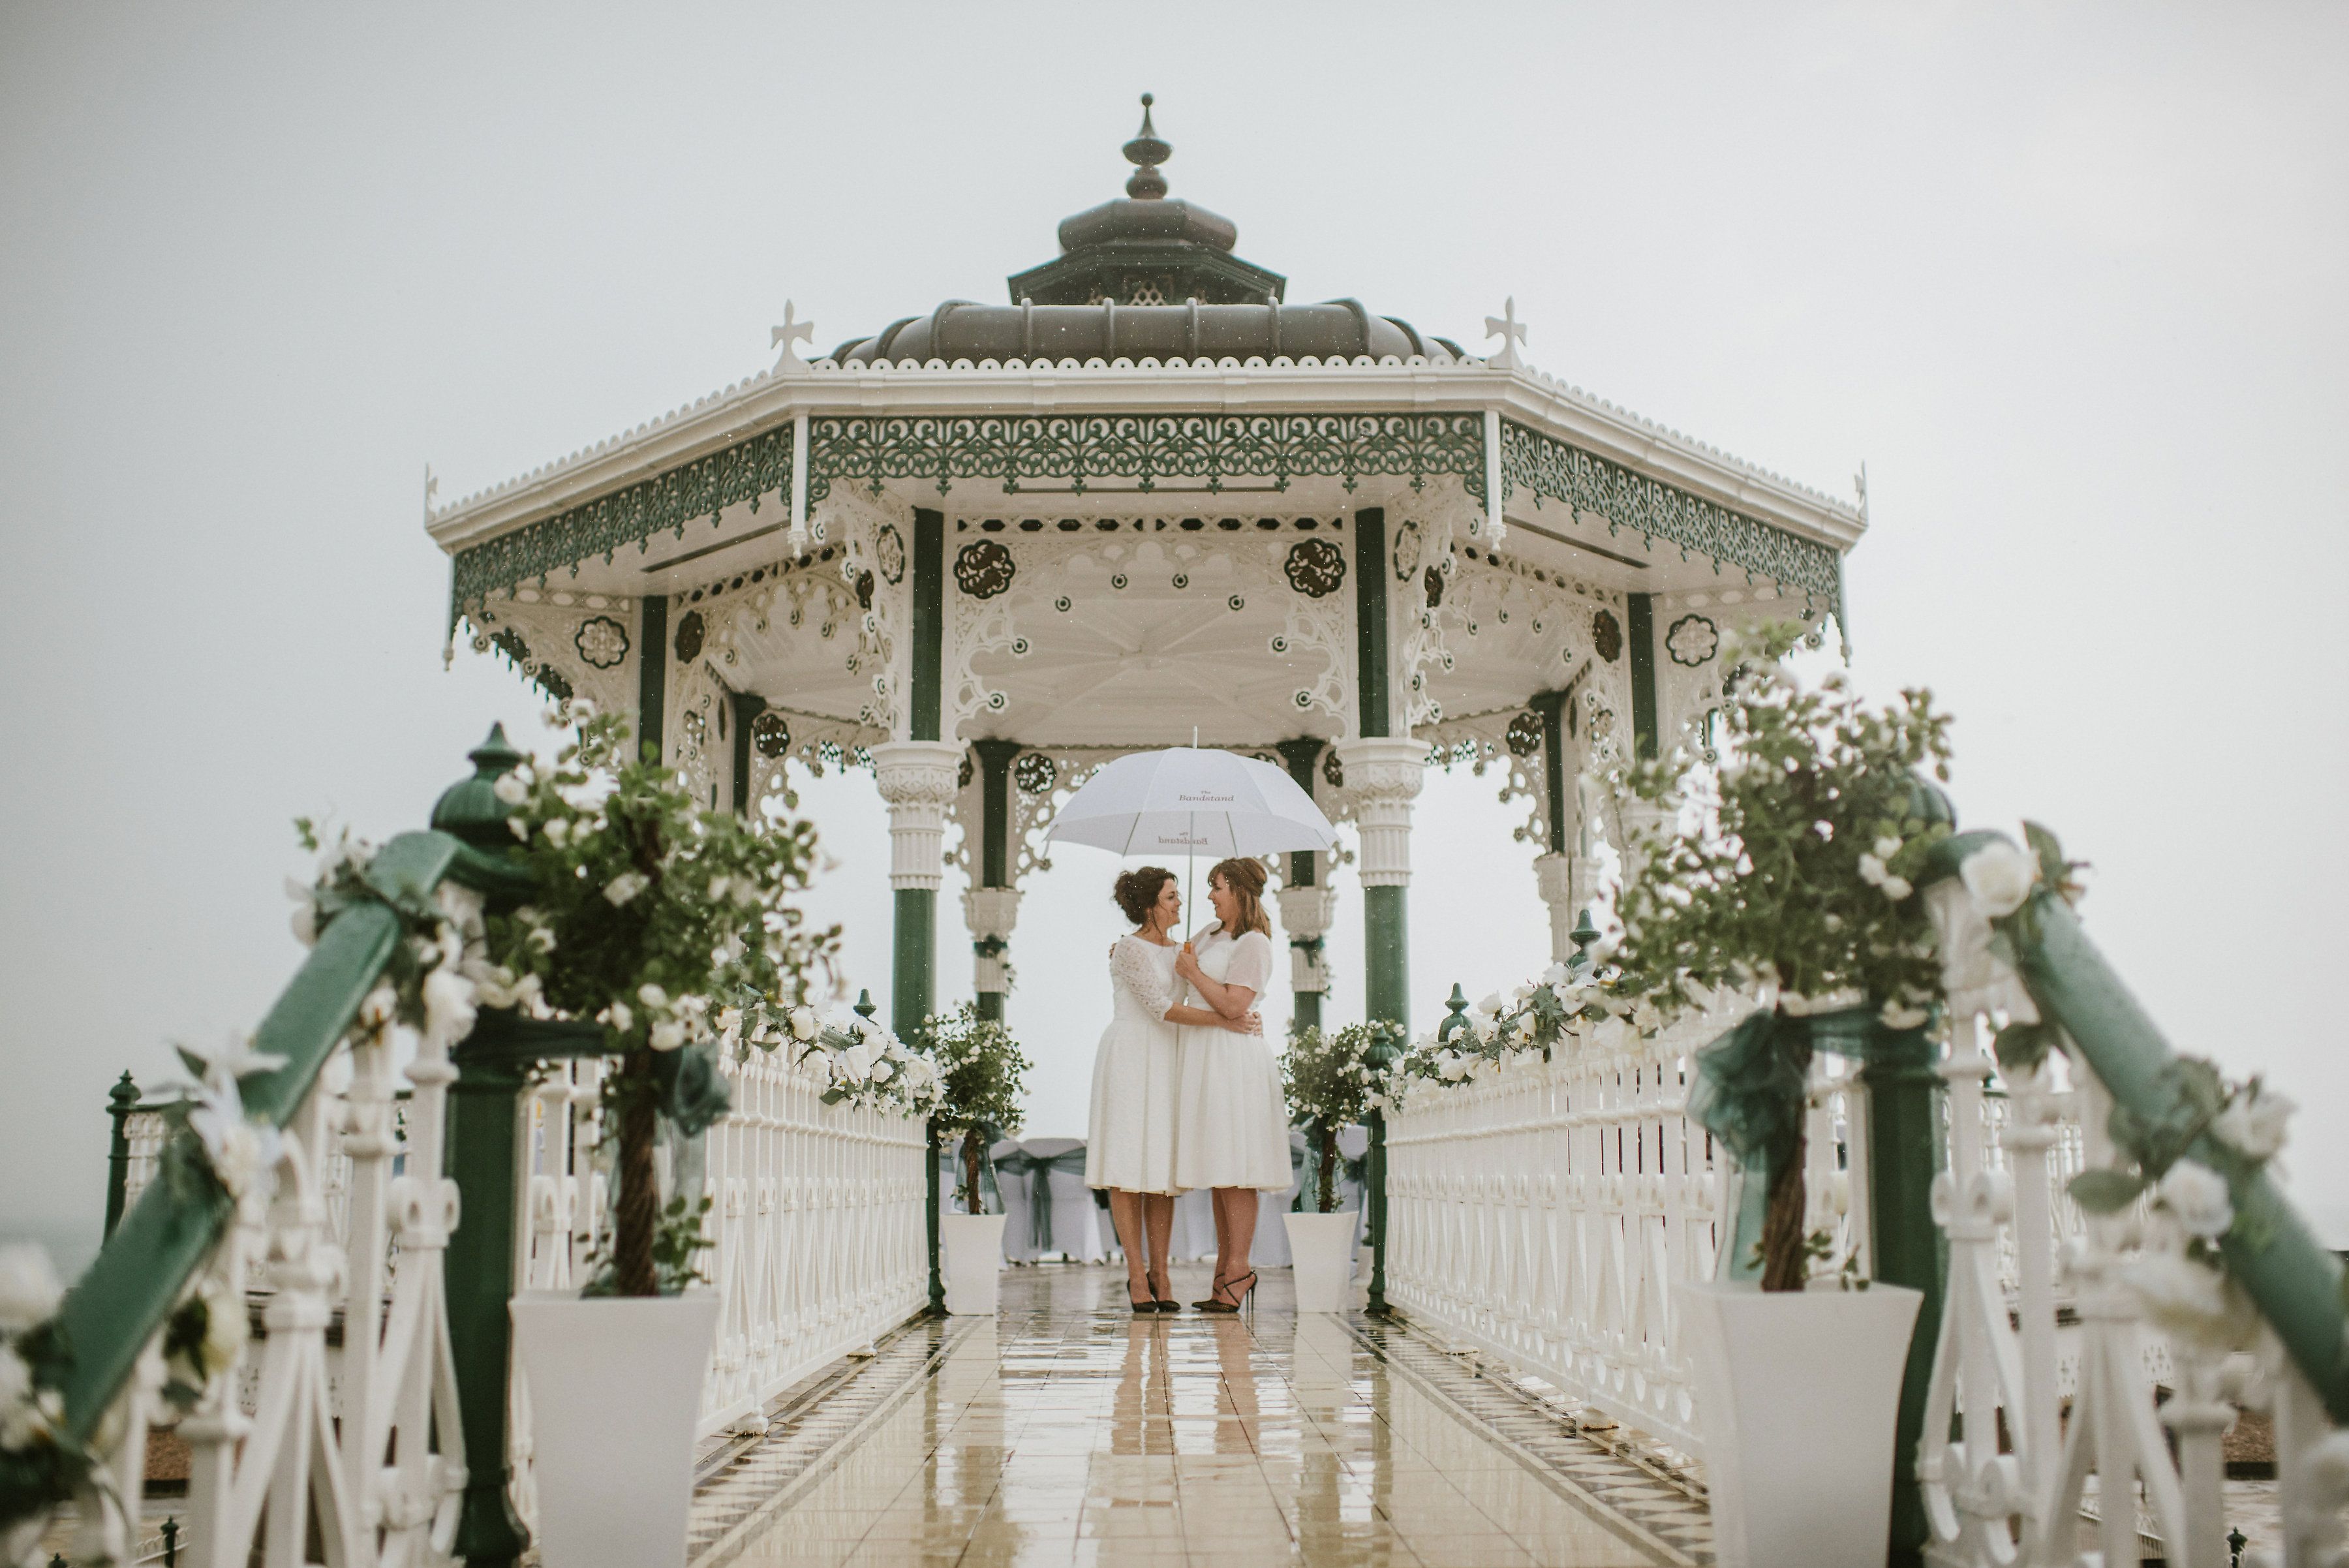 2 brides holding an umbrella, under a bandstand with lots of flowers